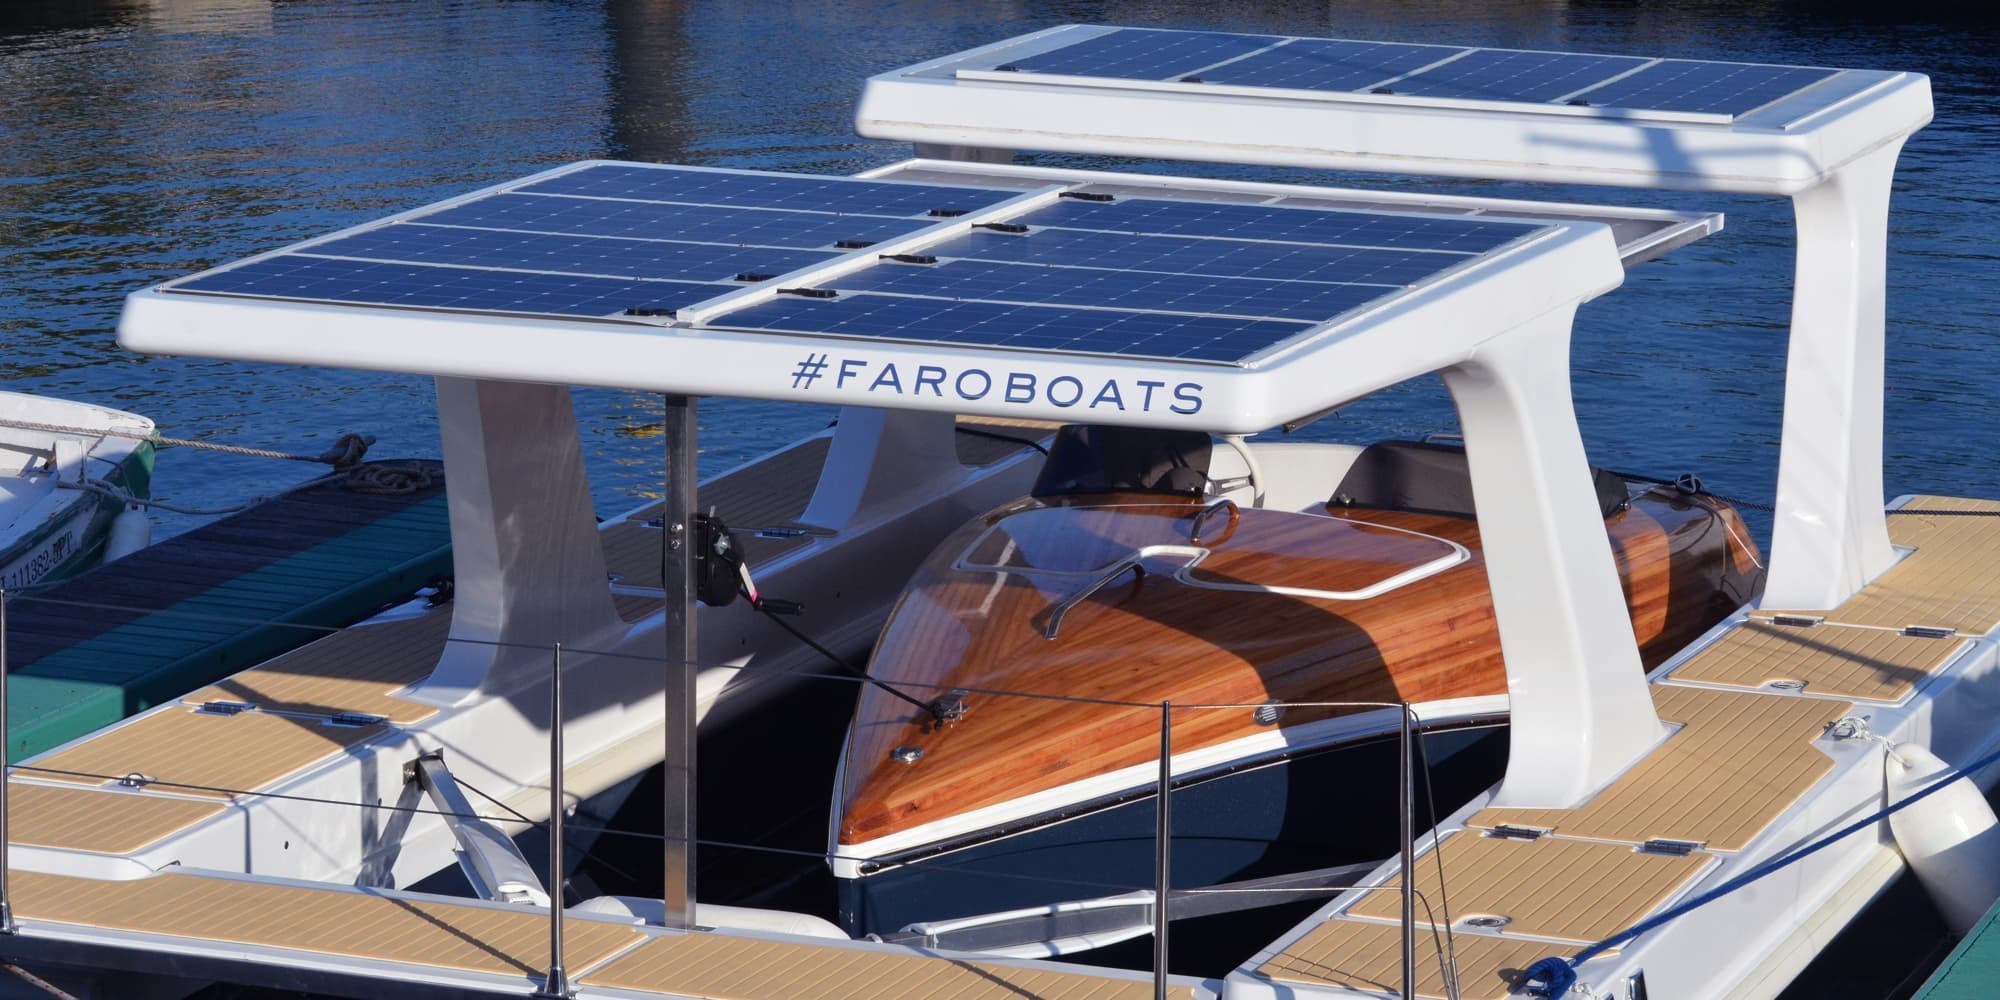 The floating solar PowerDock can recharge electric boats off-grid